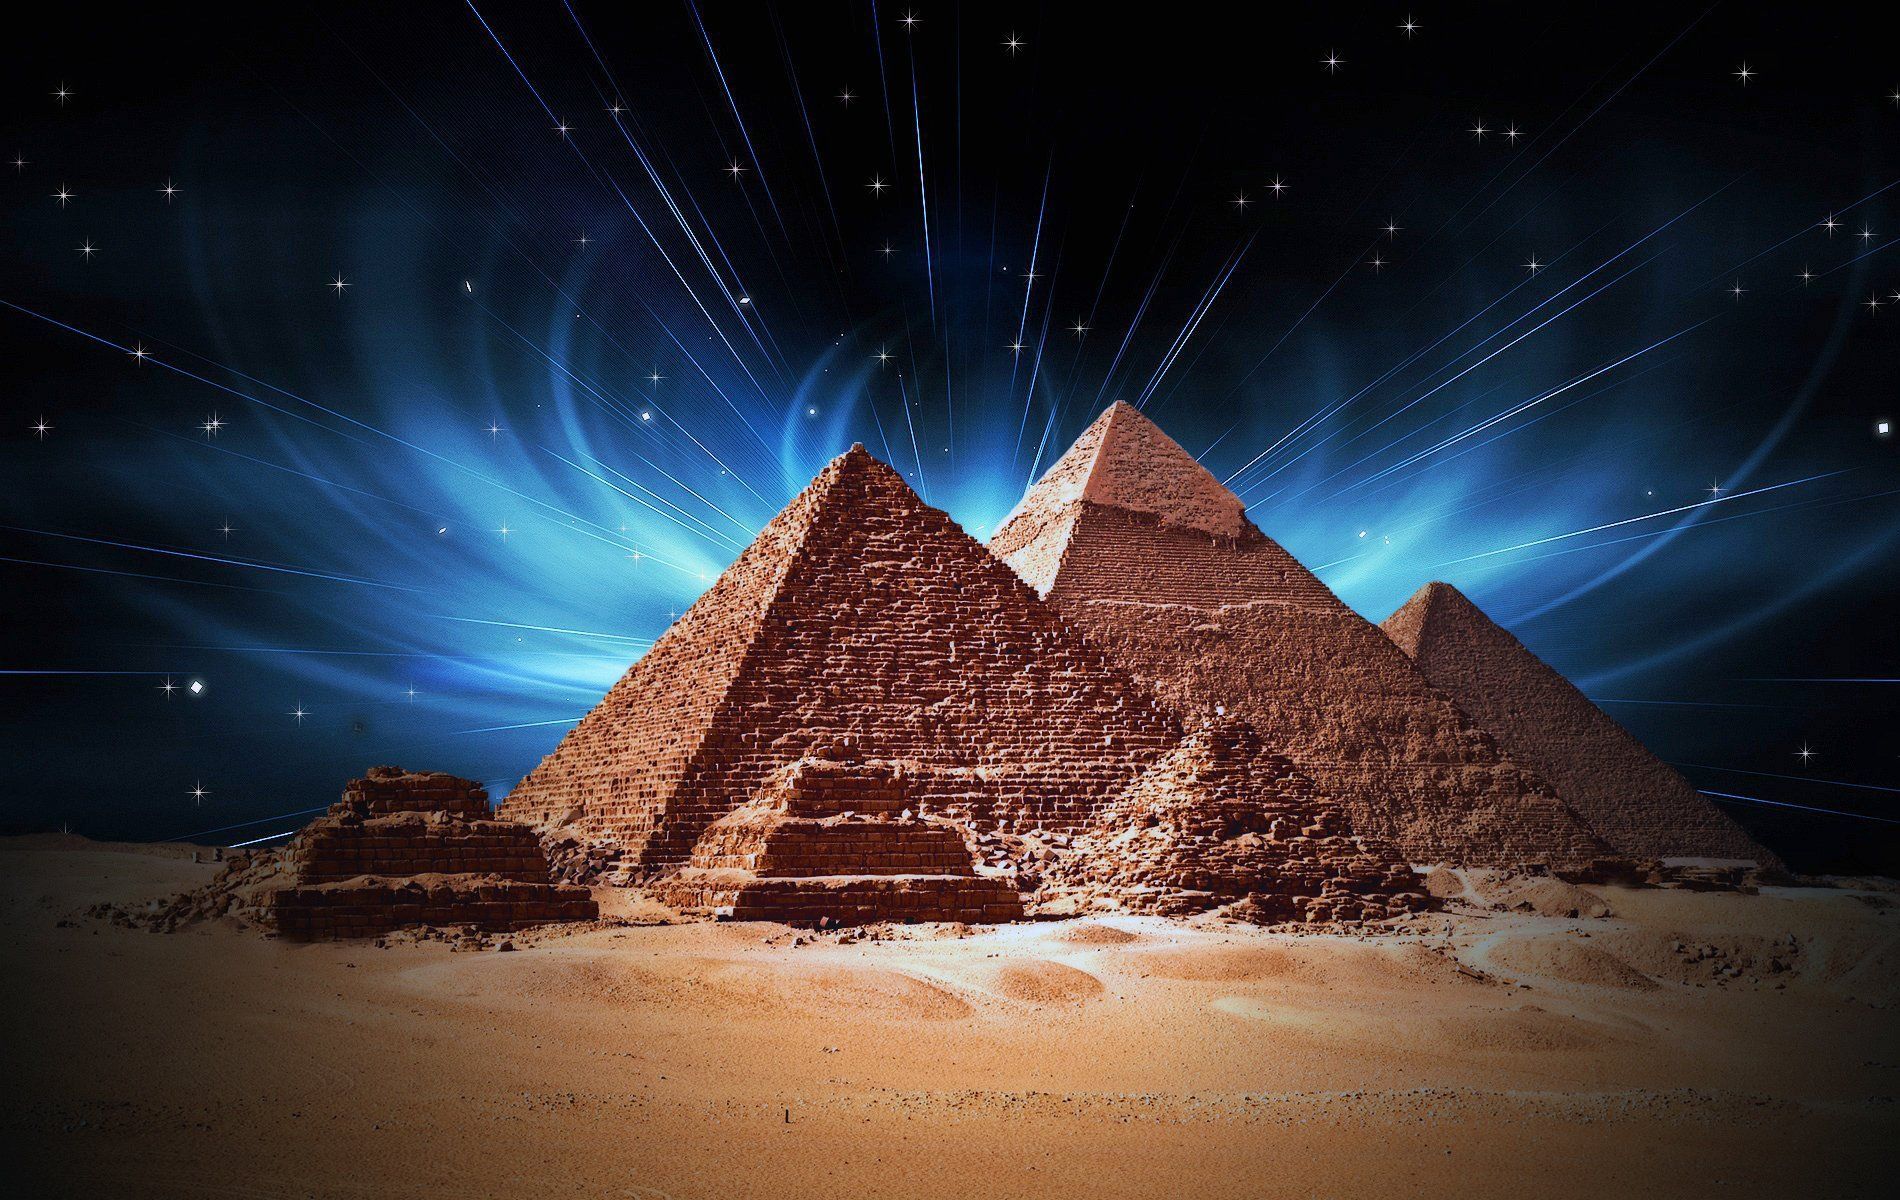 Egypt Wallpapers